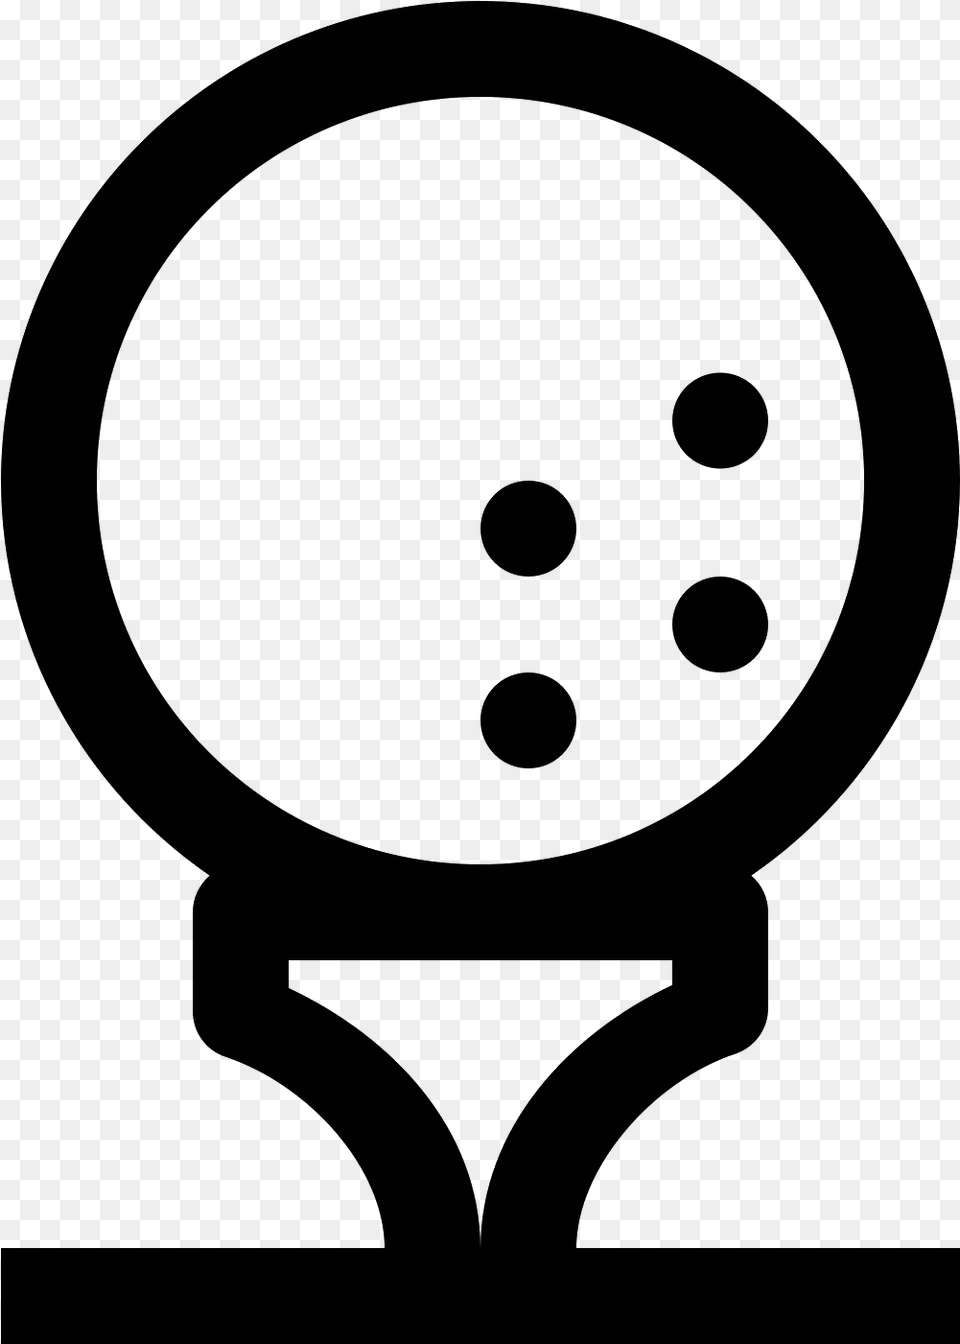 This Is A Golf Ball Resting On A Golf Tee Circle, Gray Png